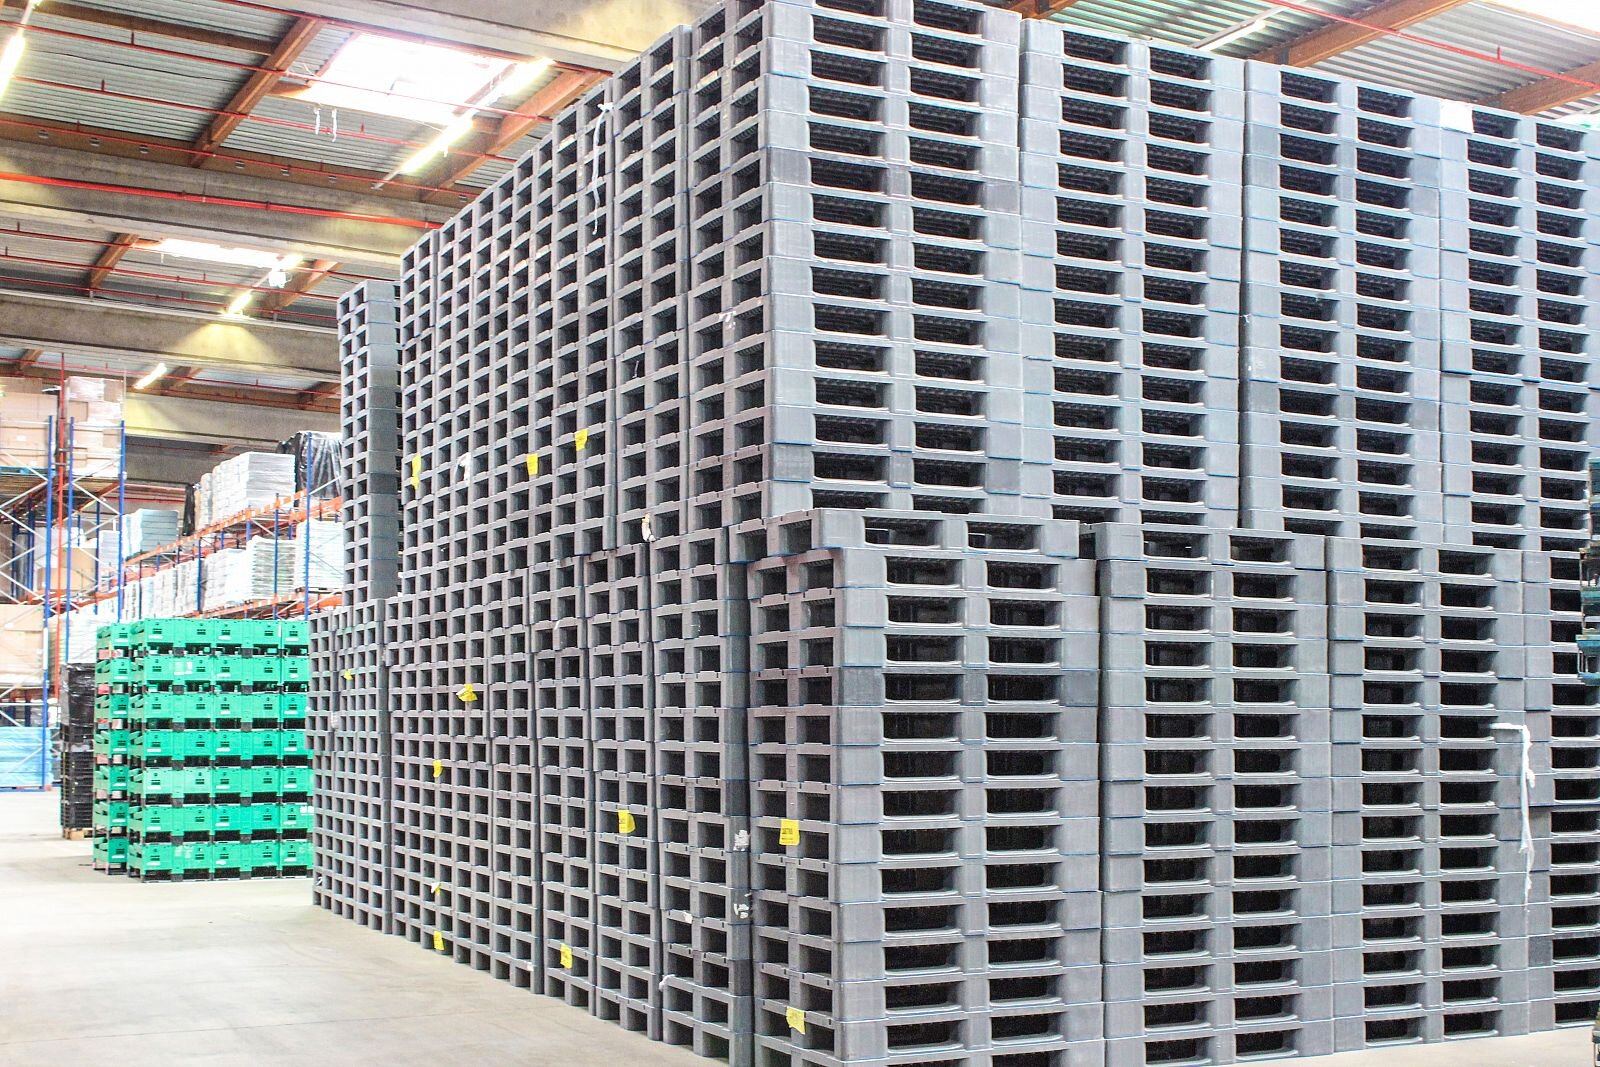 French Logistics Company Invests In CS1 Plastic Pallet From Craemer